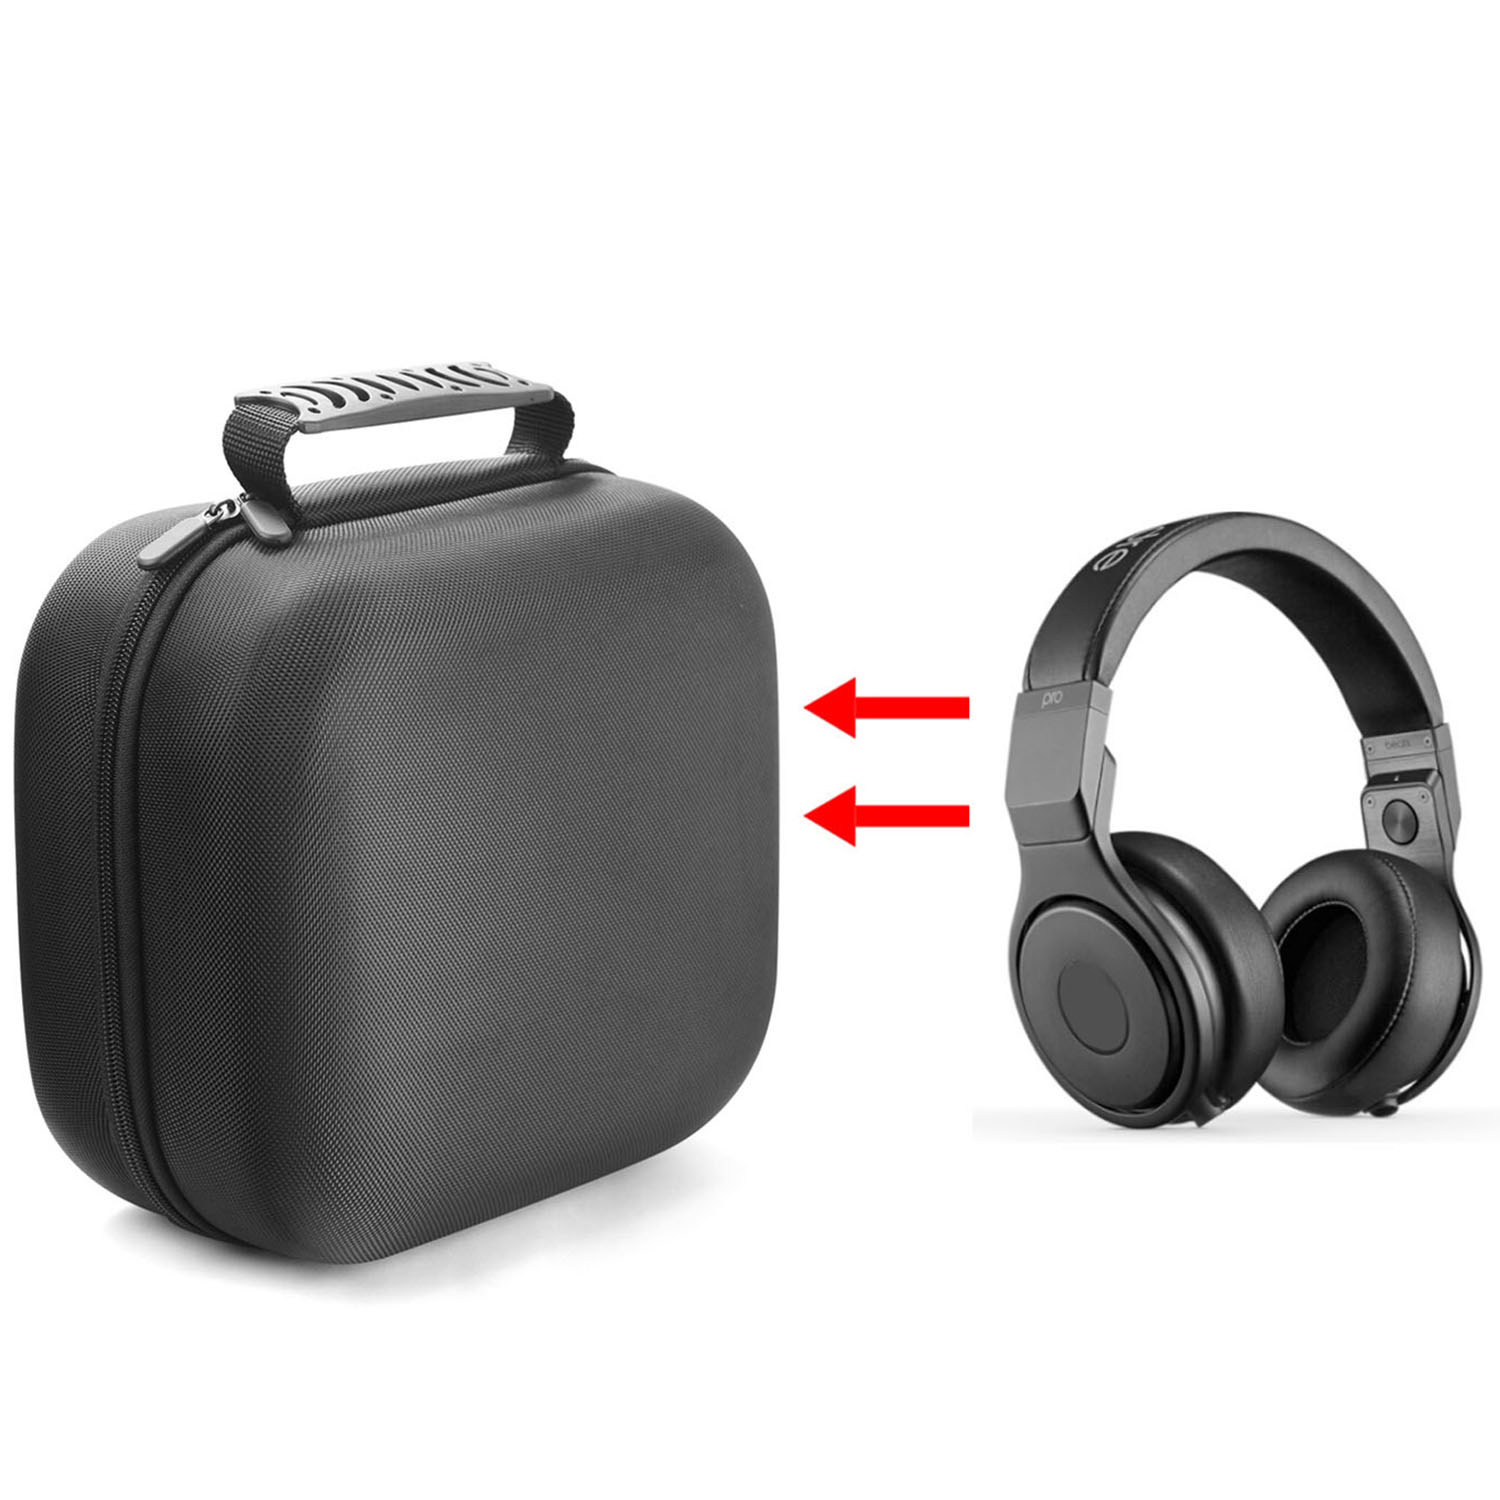 Bakeey Earphone Carrying Case Shockproof Hard Portable Headphone Storage Bag Protective Box for Beats Pro